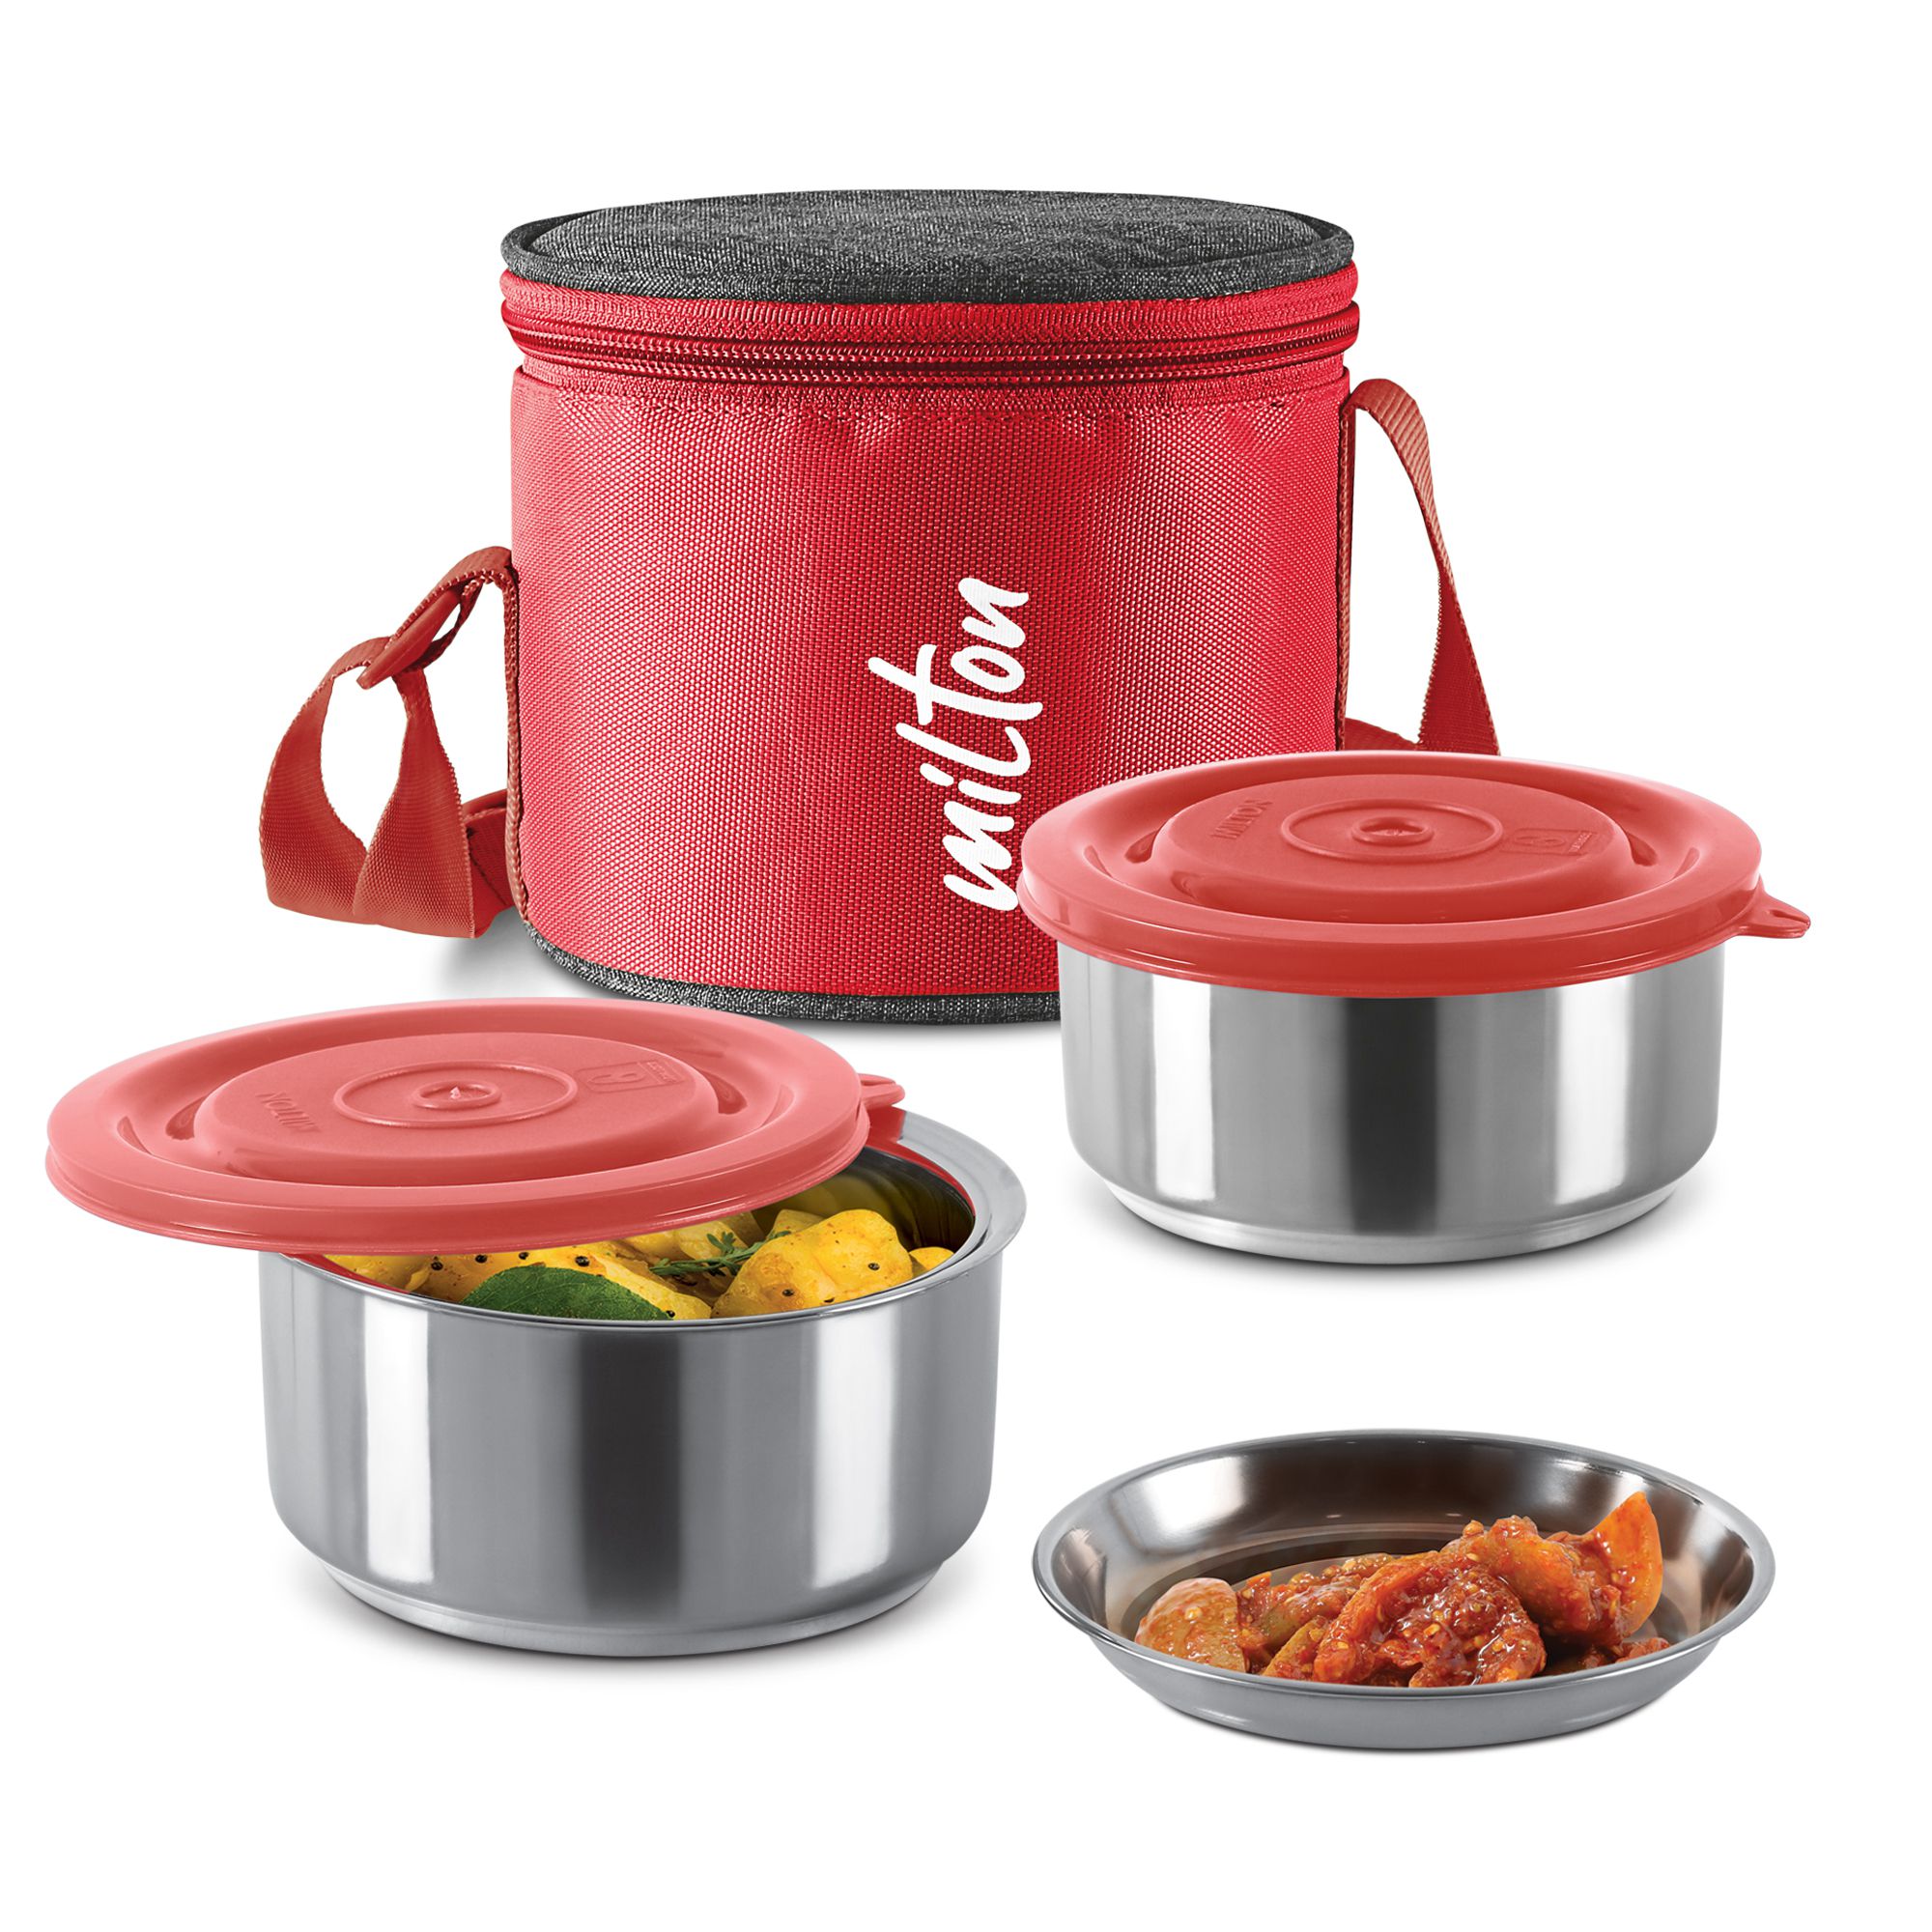     			Milton Ambition 2 Stainless Steel Tiffin, 2 Containers (300 ml Each with Jacket) Red